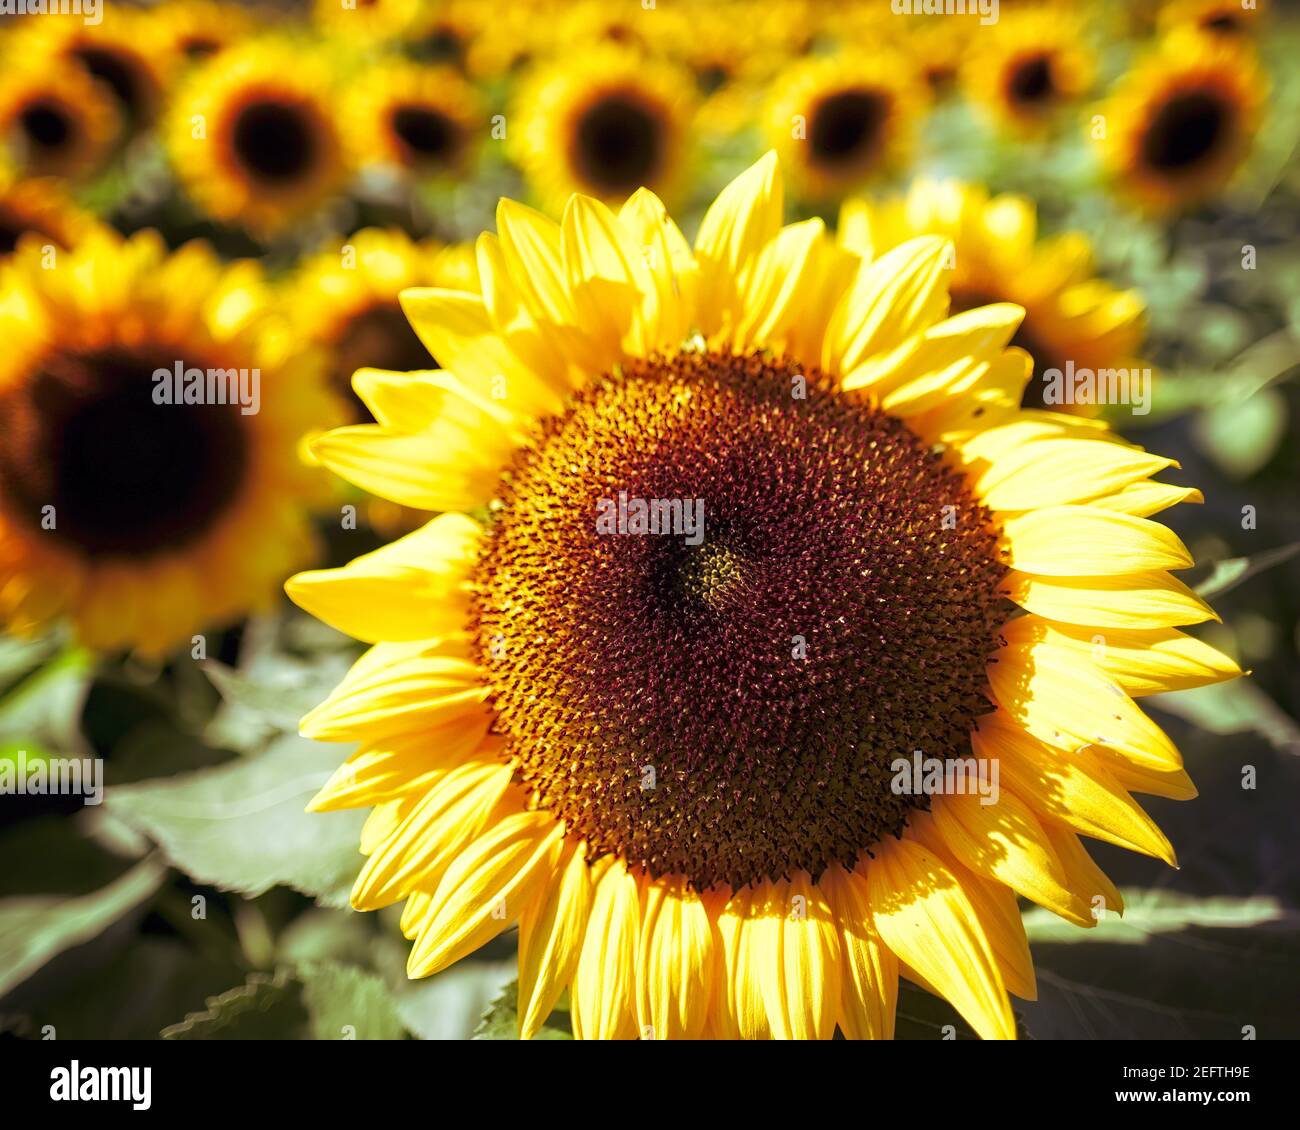 Sunflower Head Close Up in a Field of Sunflowers Stock Photo